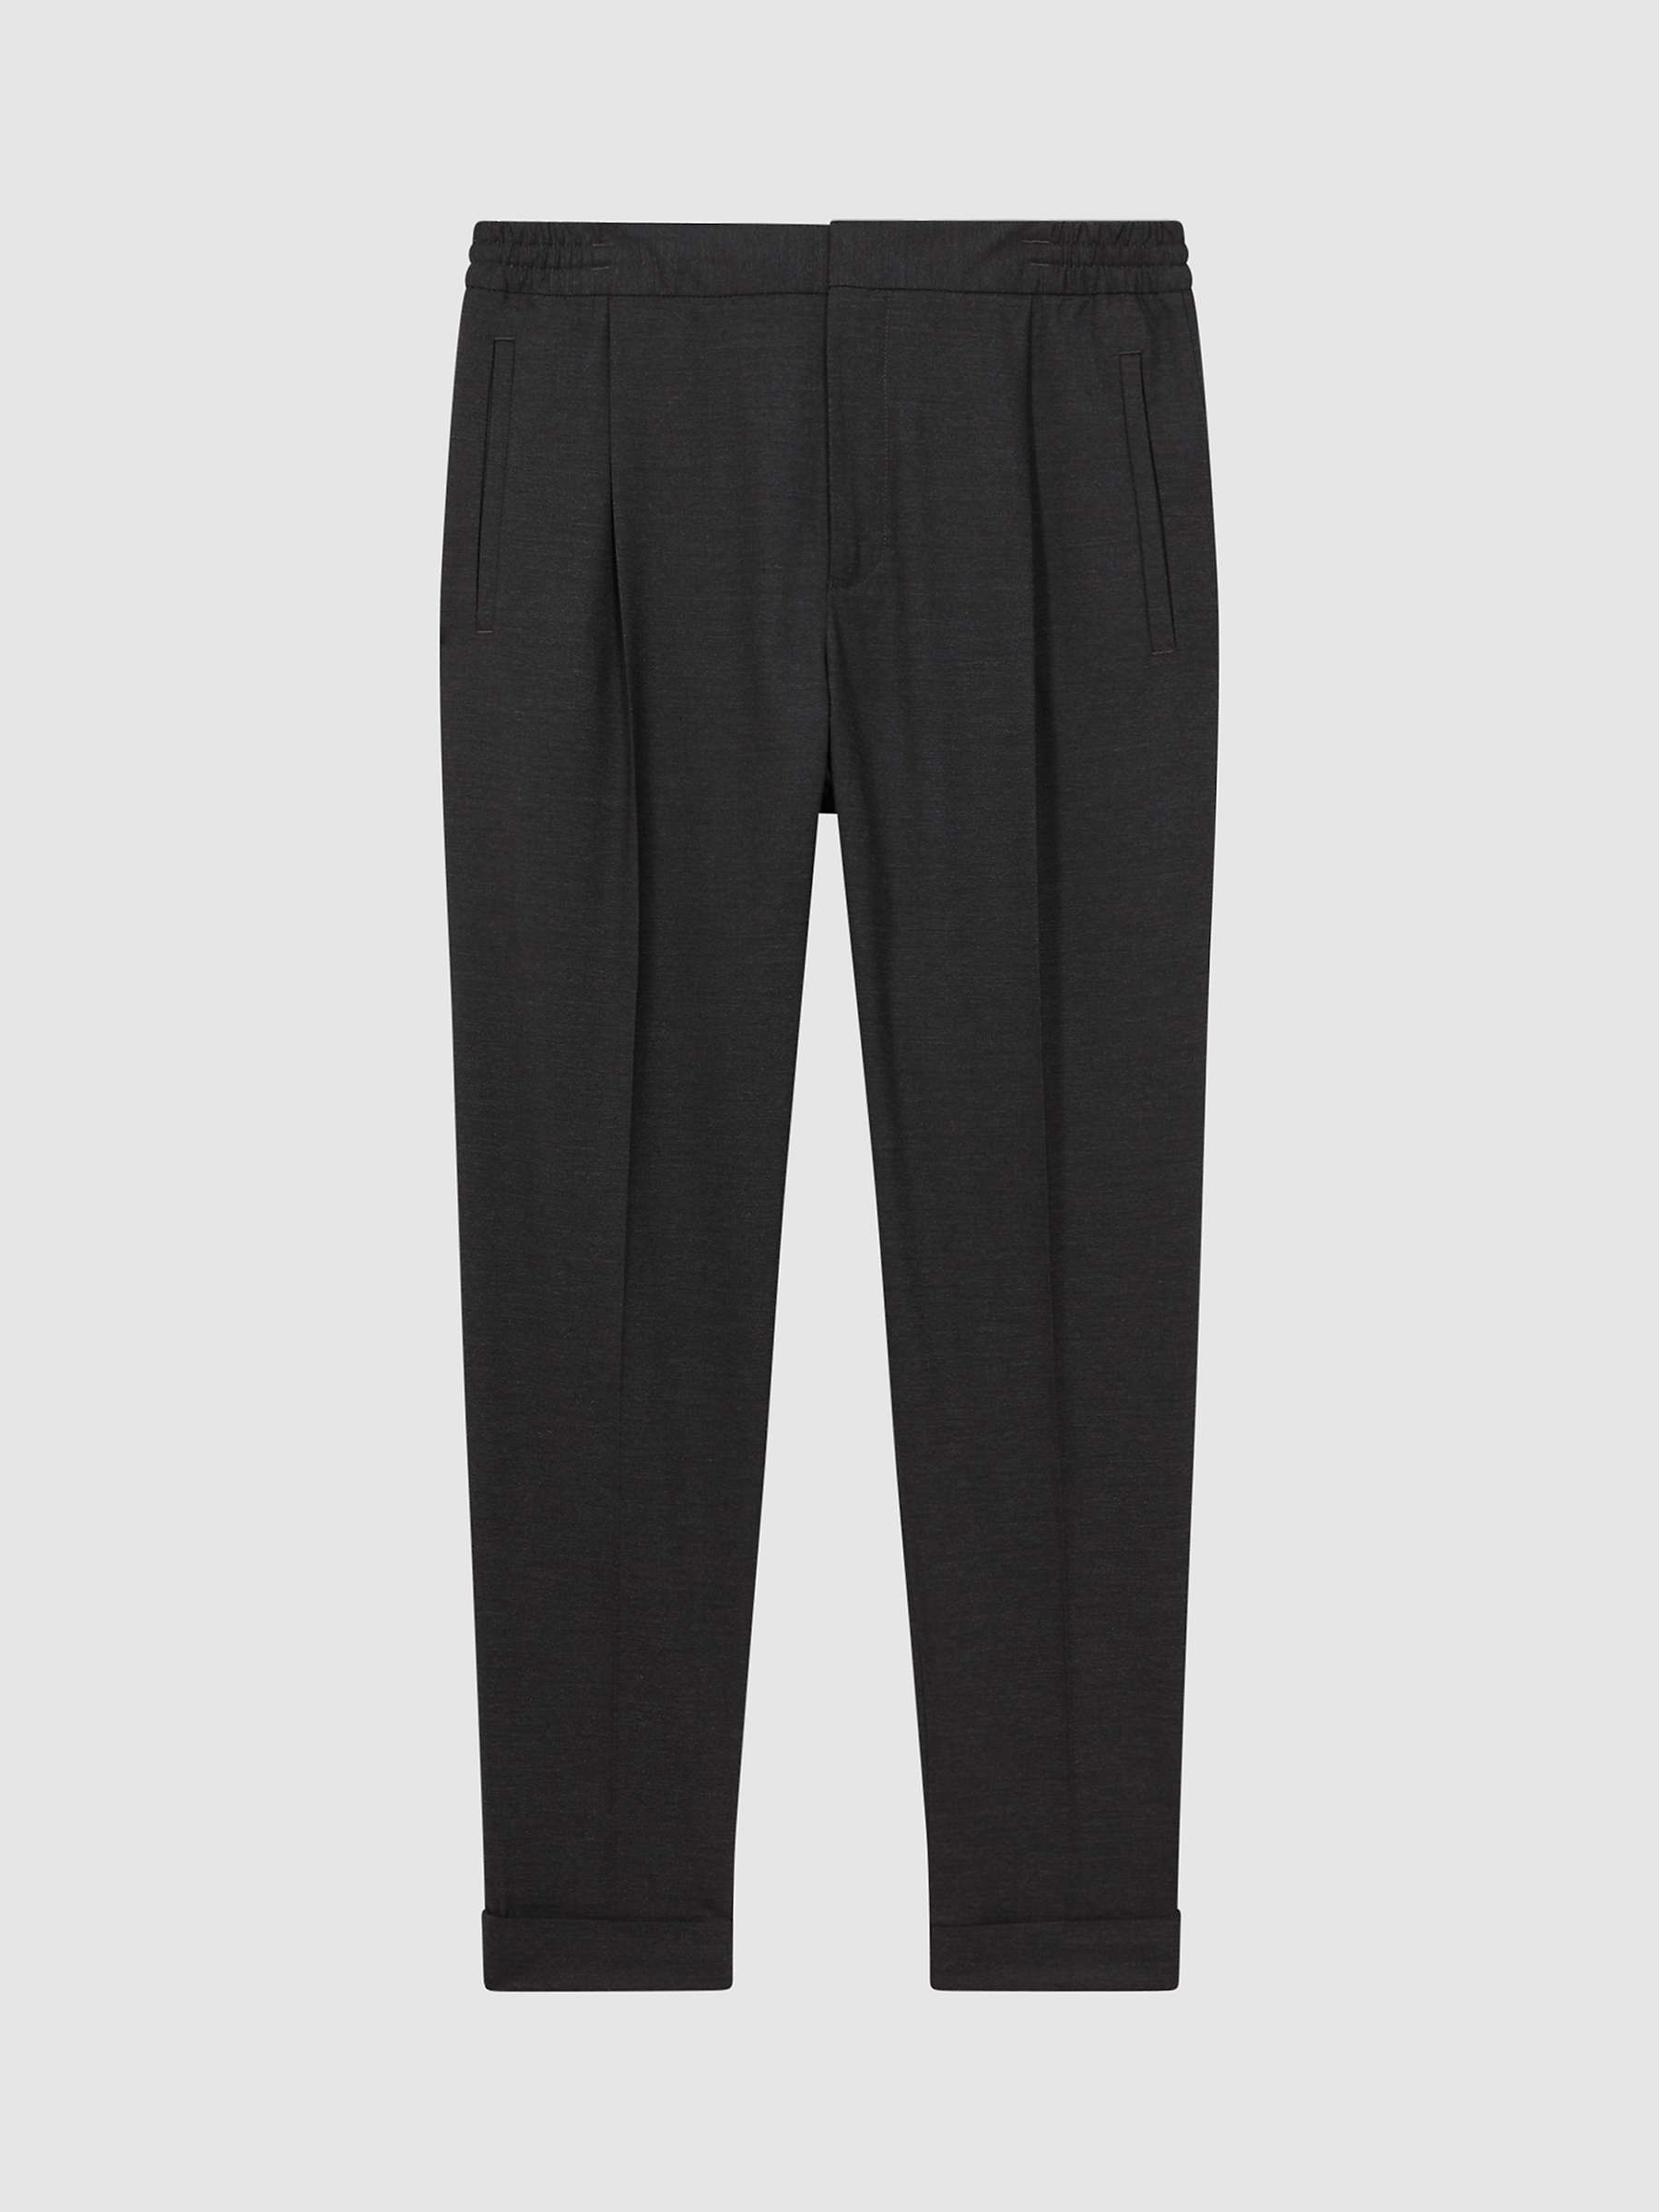 Buy Reiss Brighton Pleated Relaxed Trousers, Charcoal Online at johnlewis.com